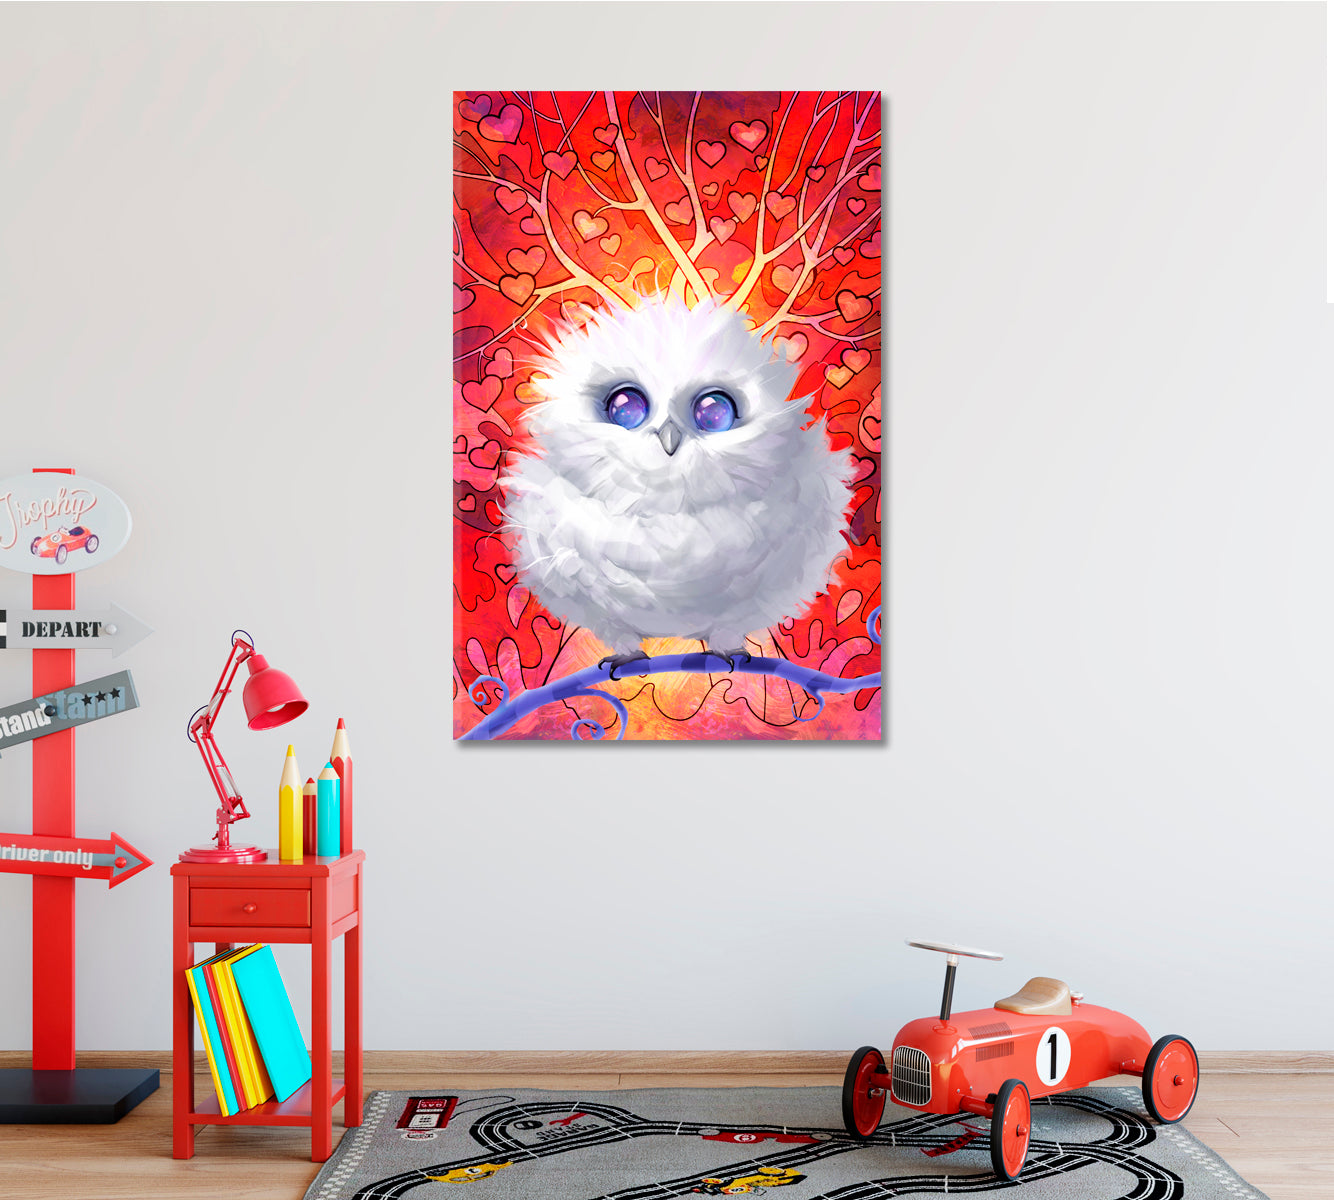 Fluffy White Owl with Beautiful Eyes Canvas Print ArtLexy   